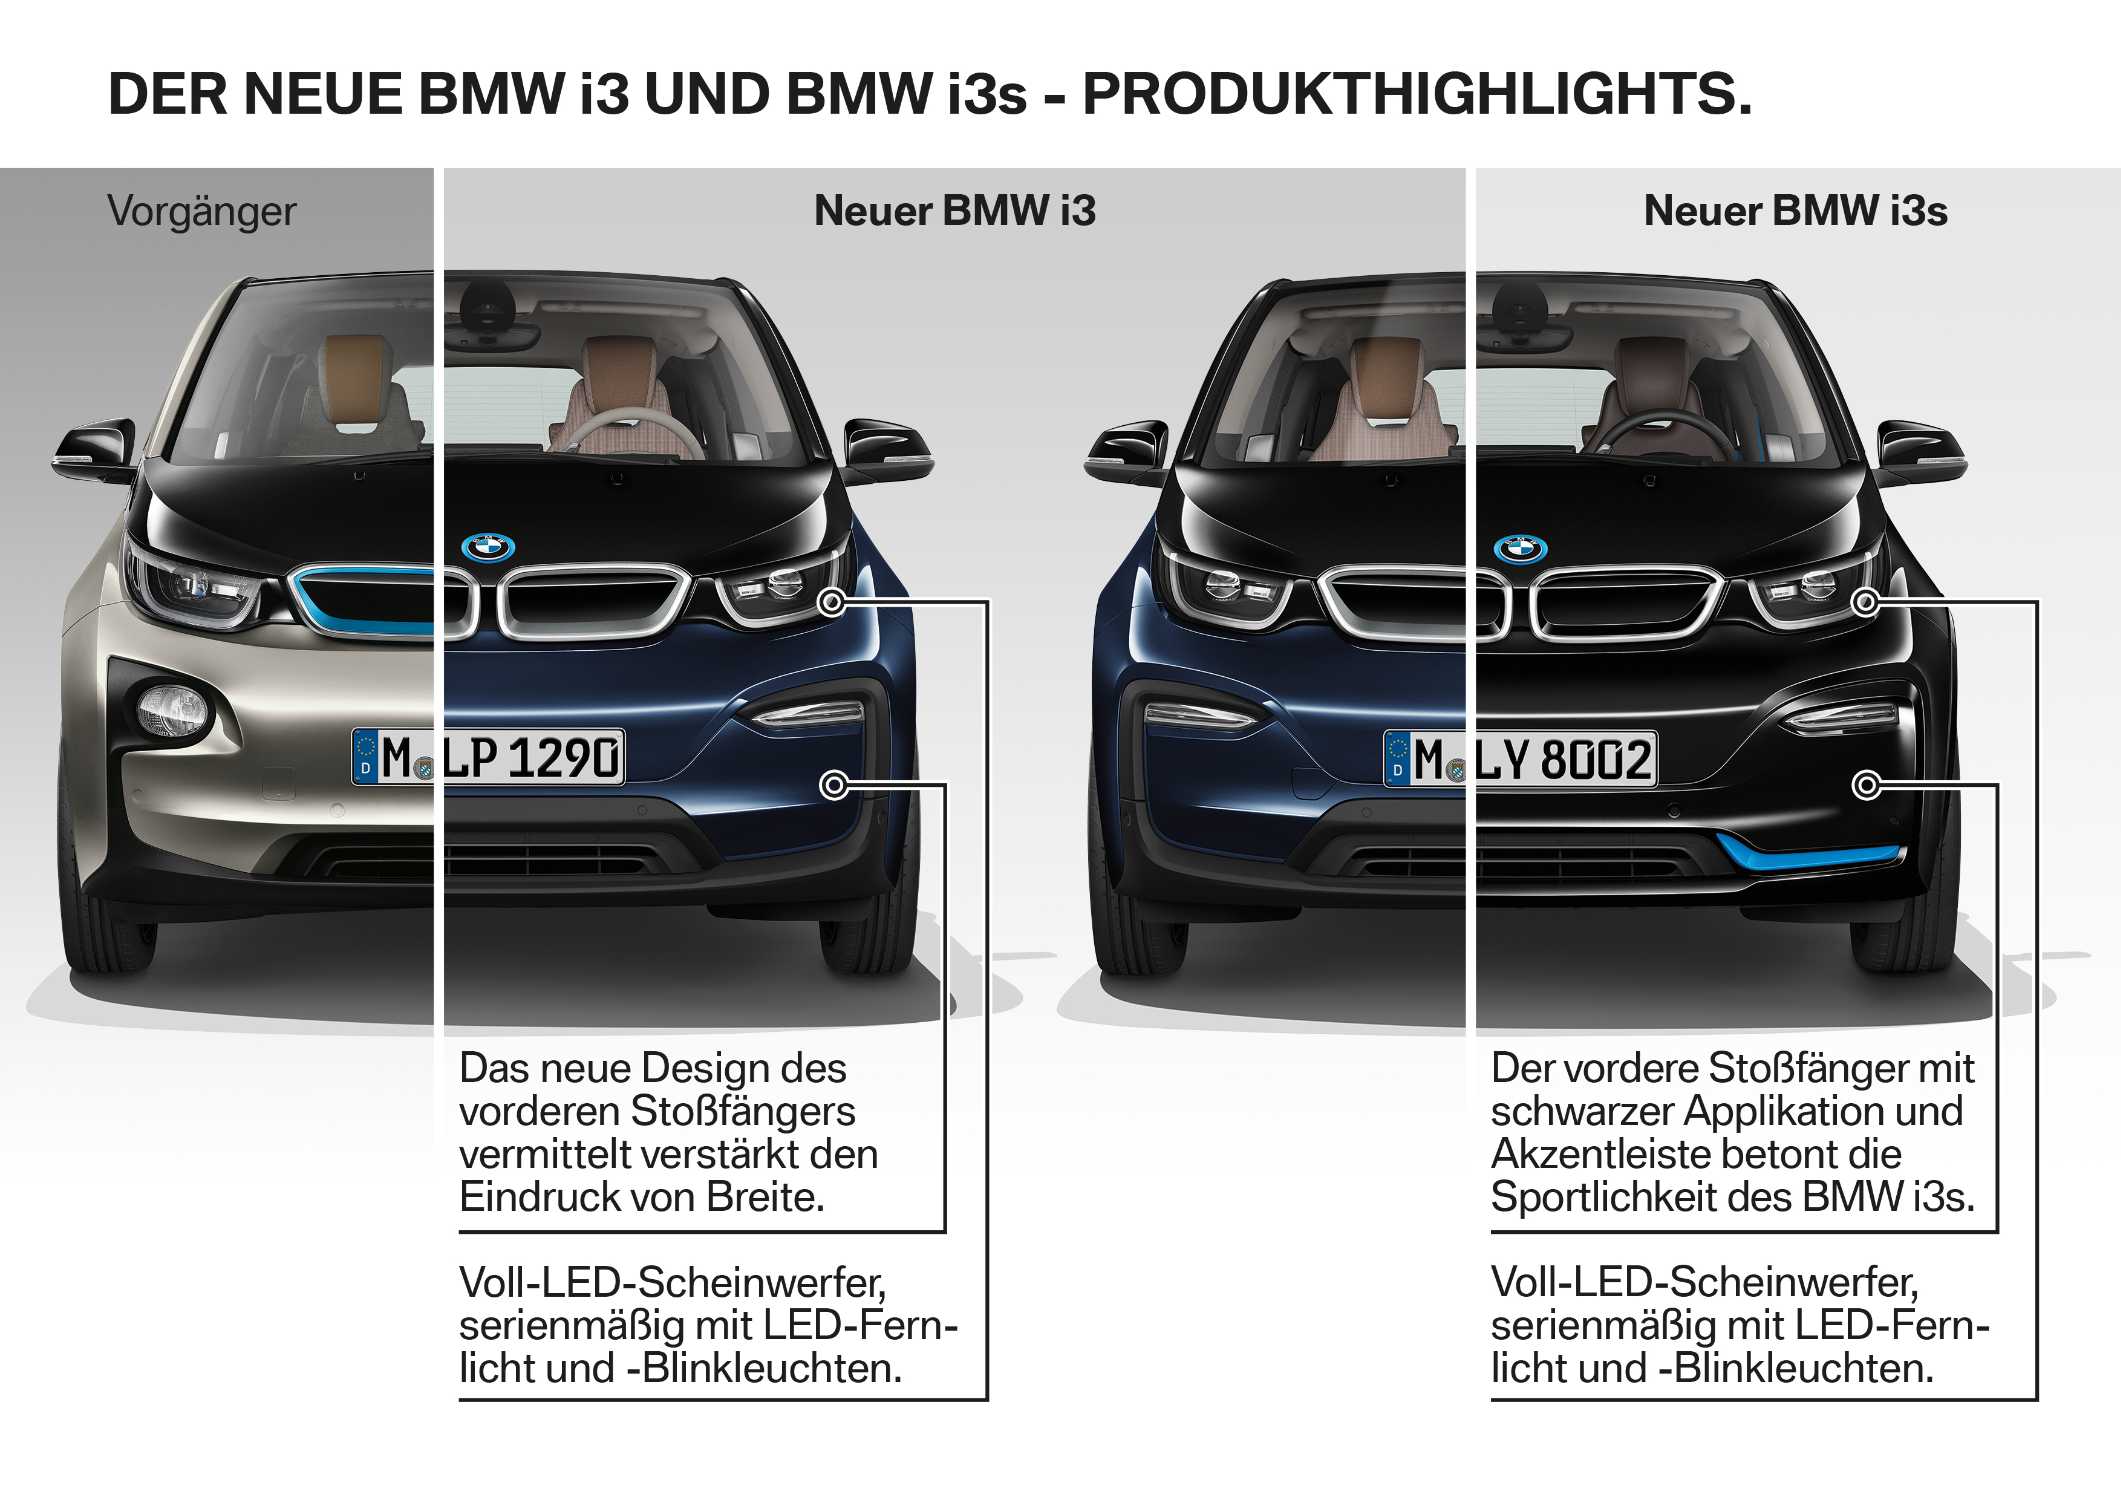 The new BMW i3 and BMW i3s - Product Highlights. (08/2017)